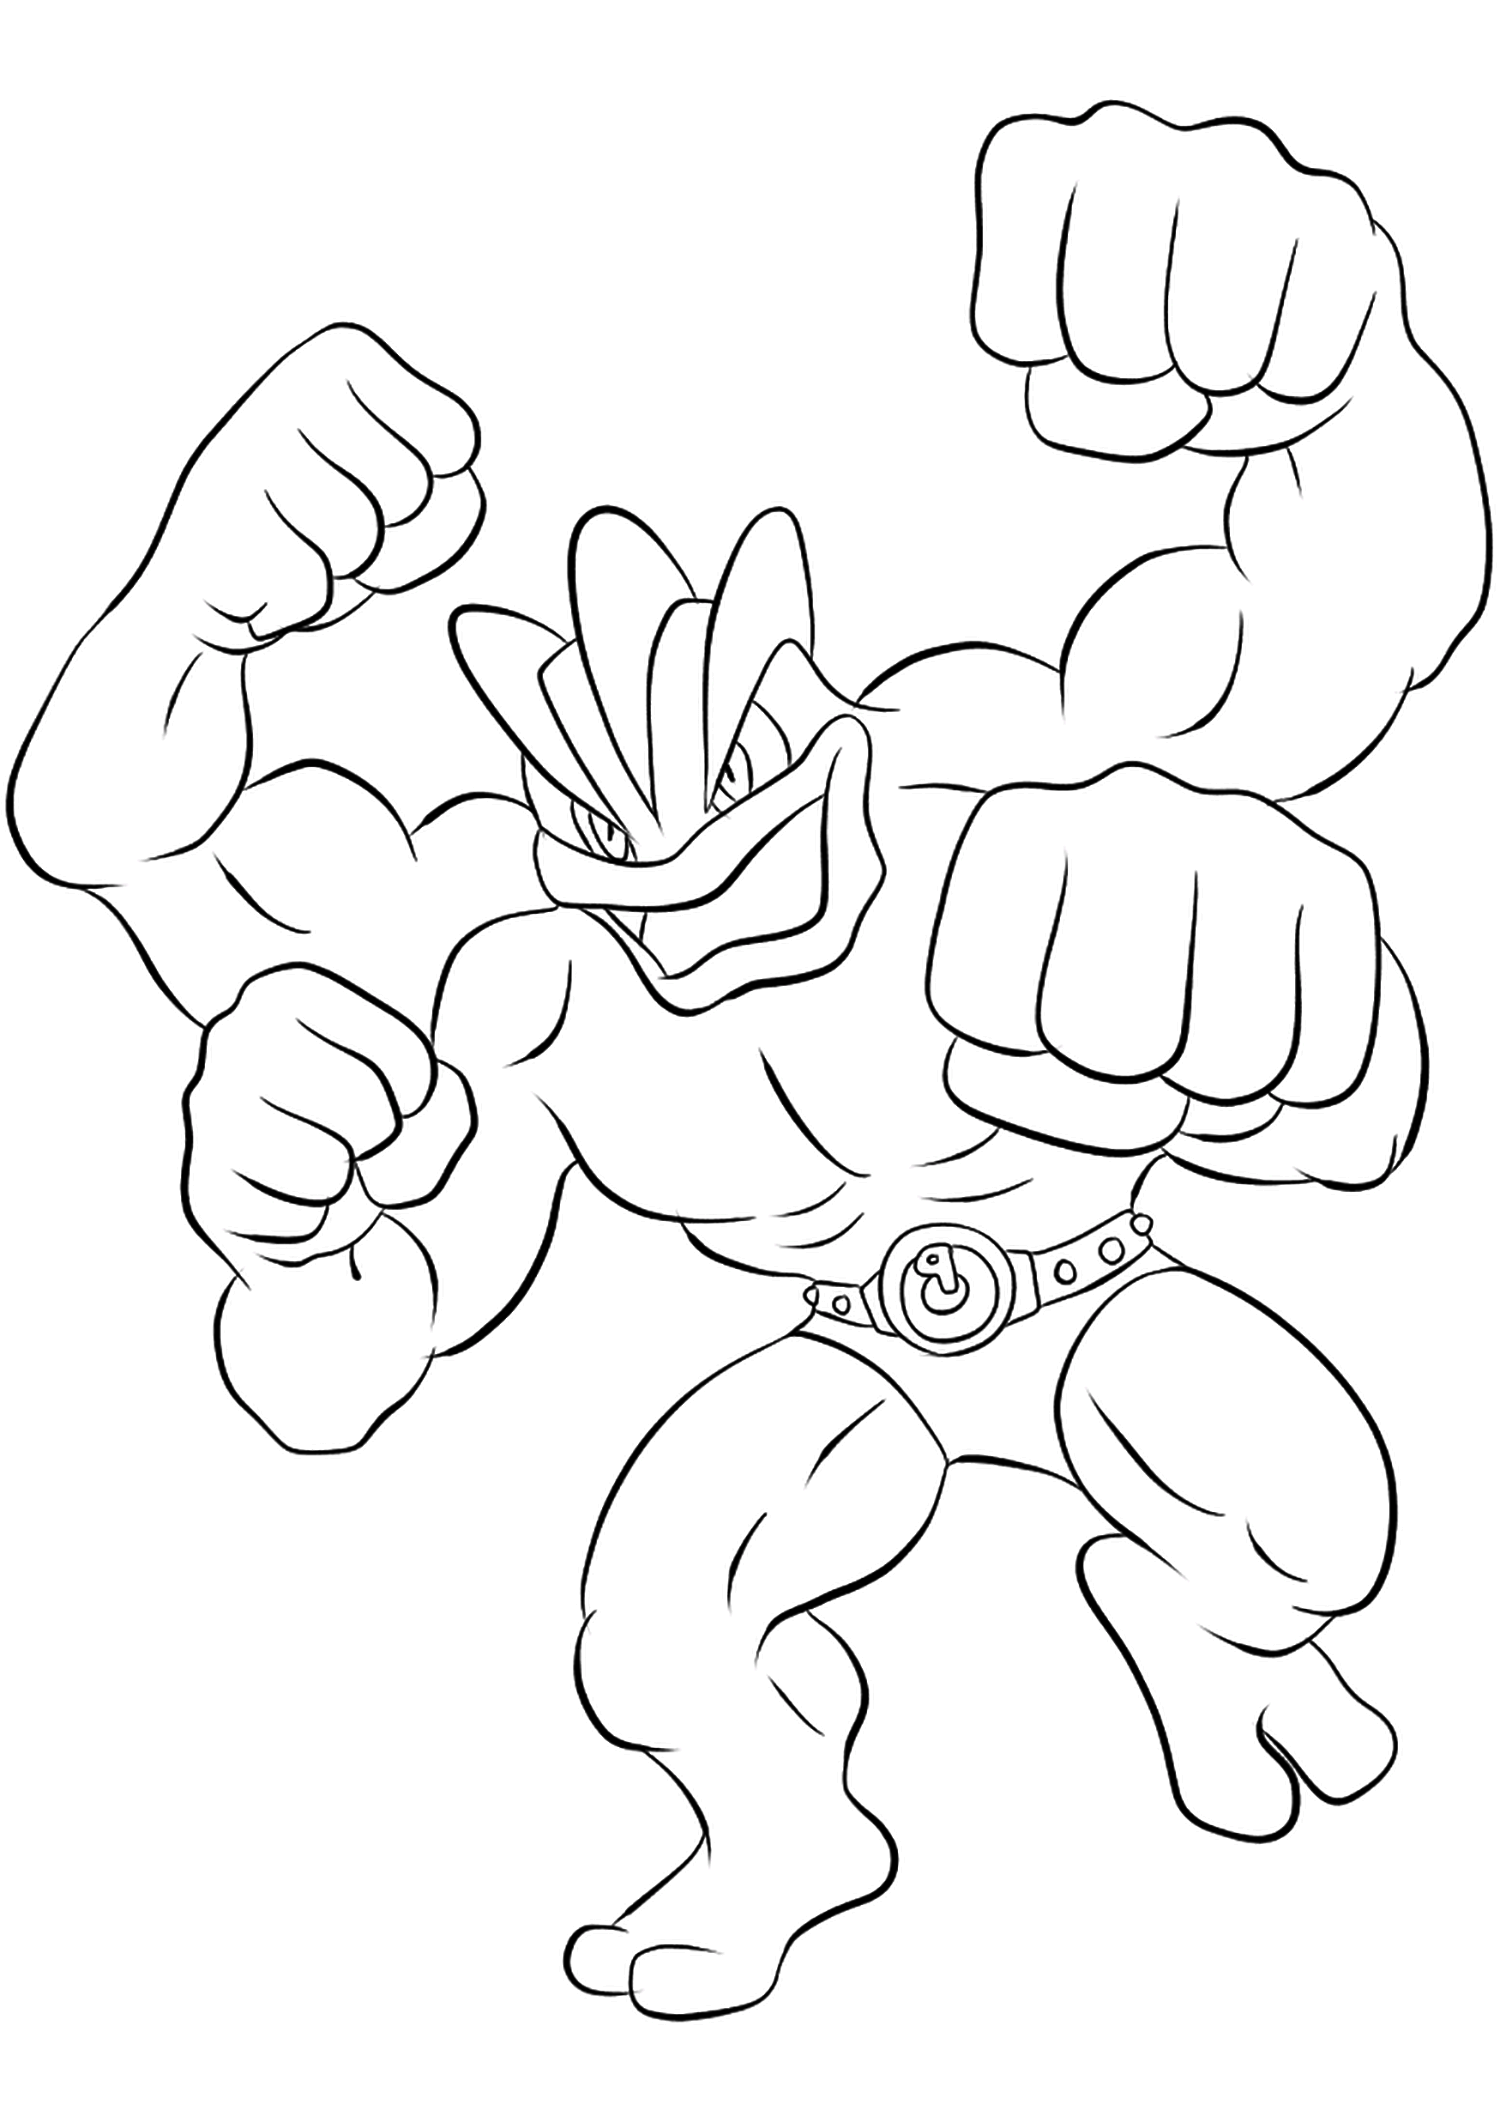 Printable Machamp coloring page for both aldults and kids.